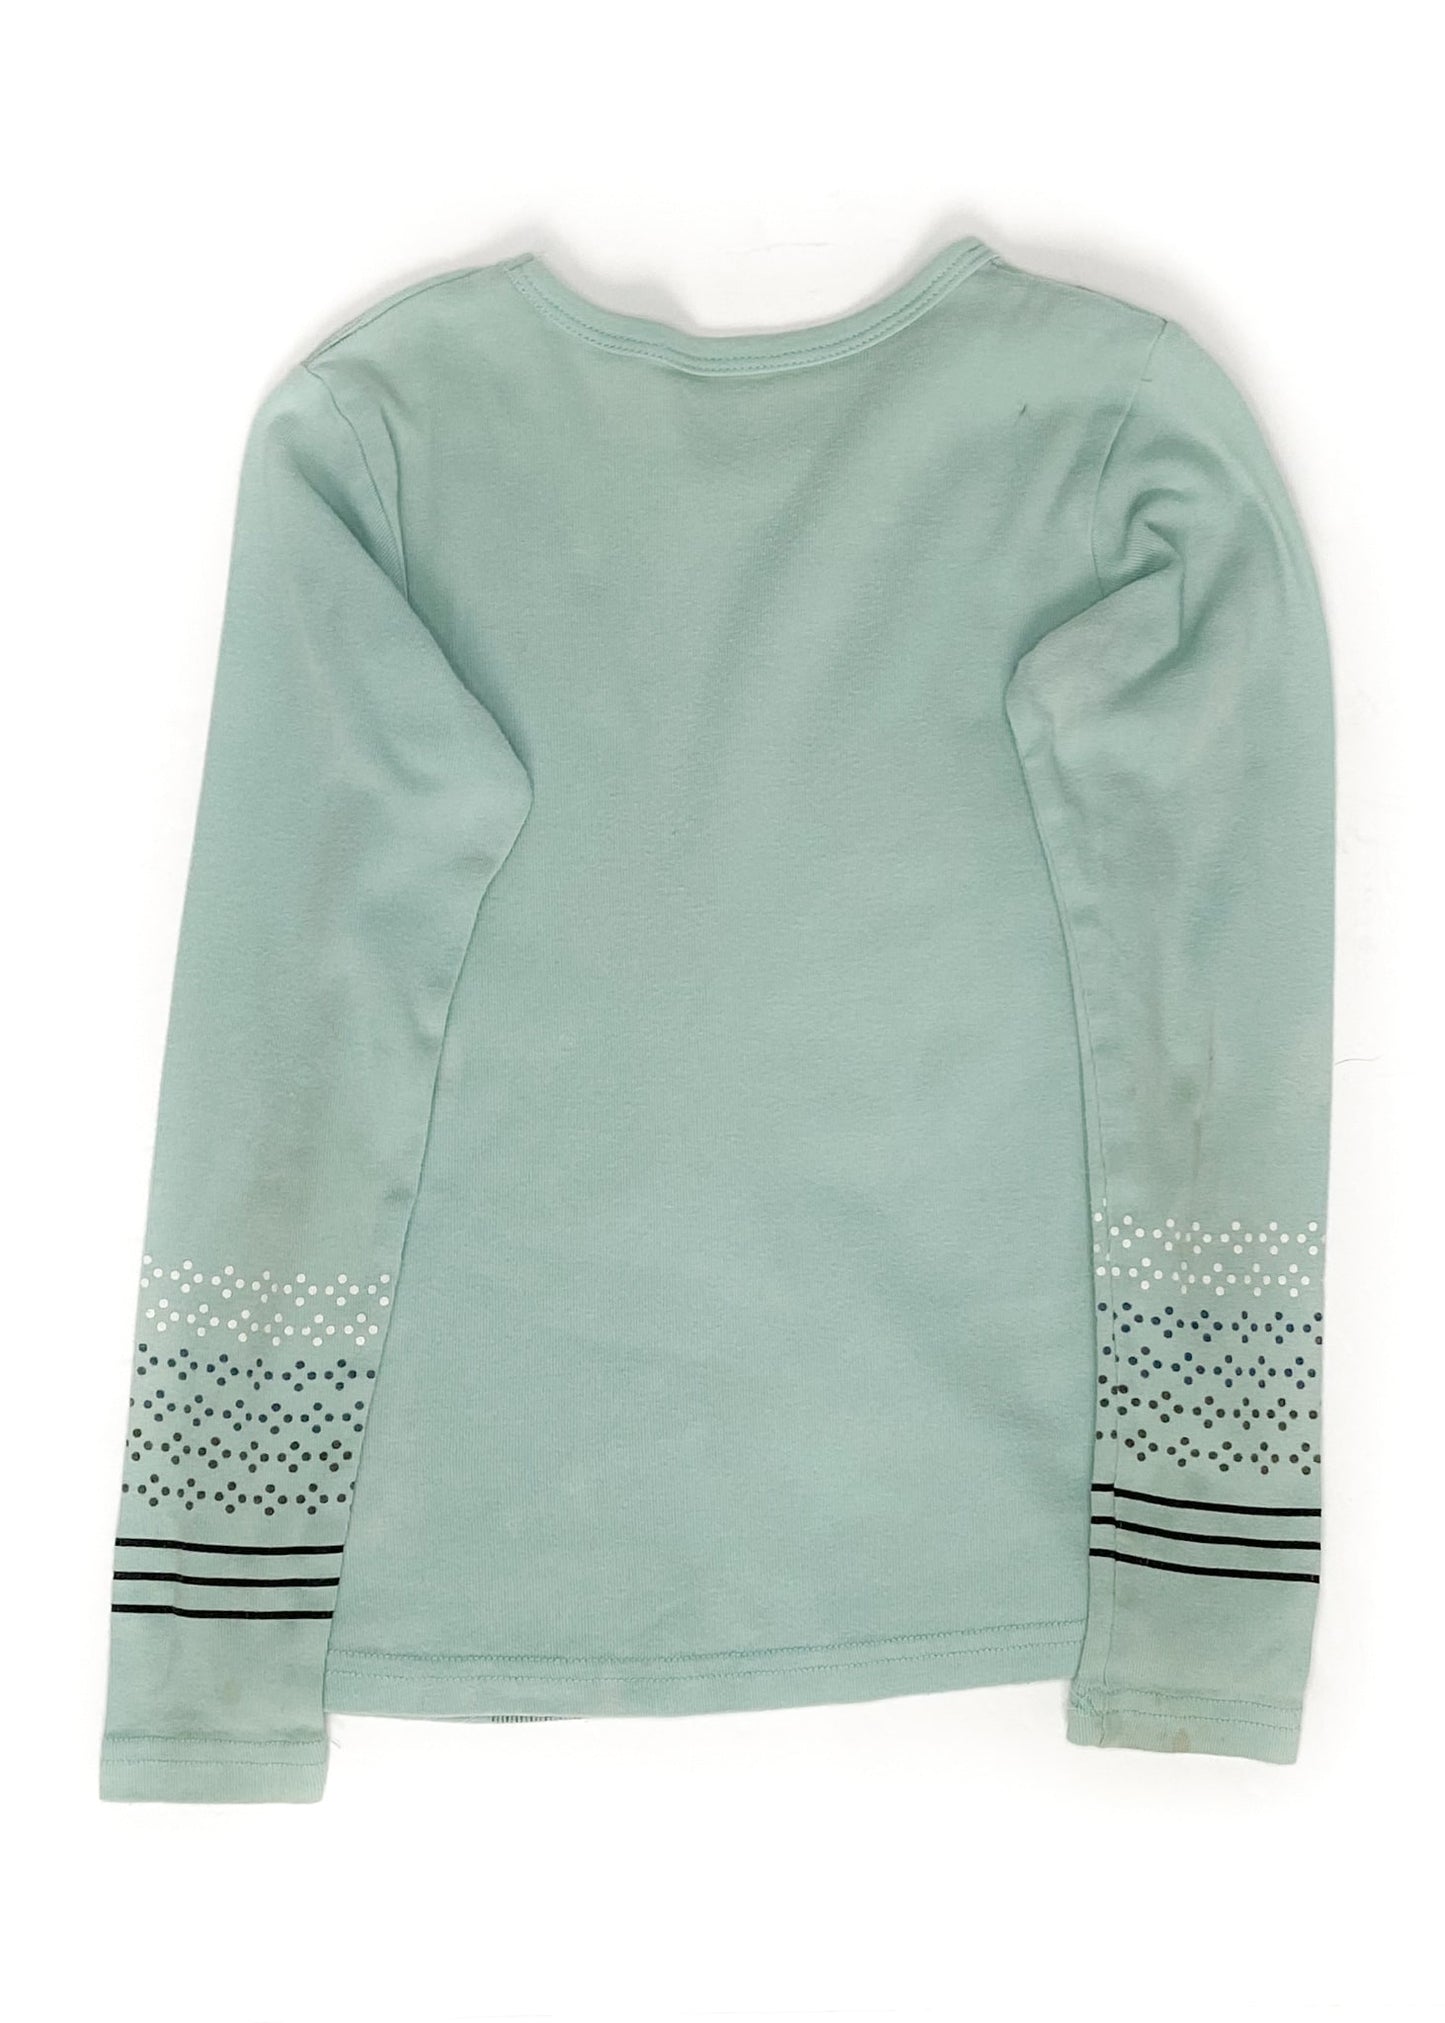 Kerrits Long Sleeve Top - Teal - Youth Small